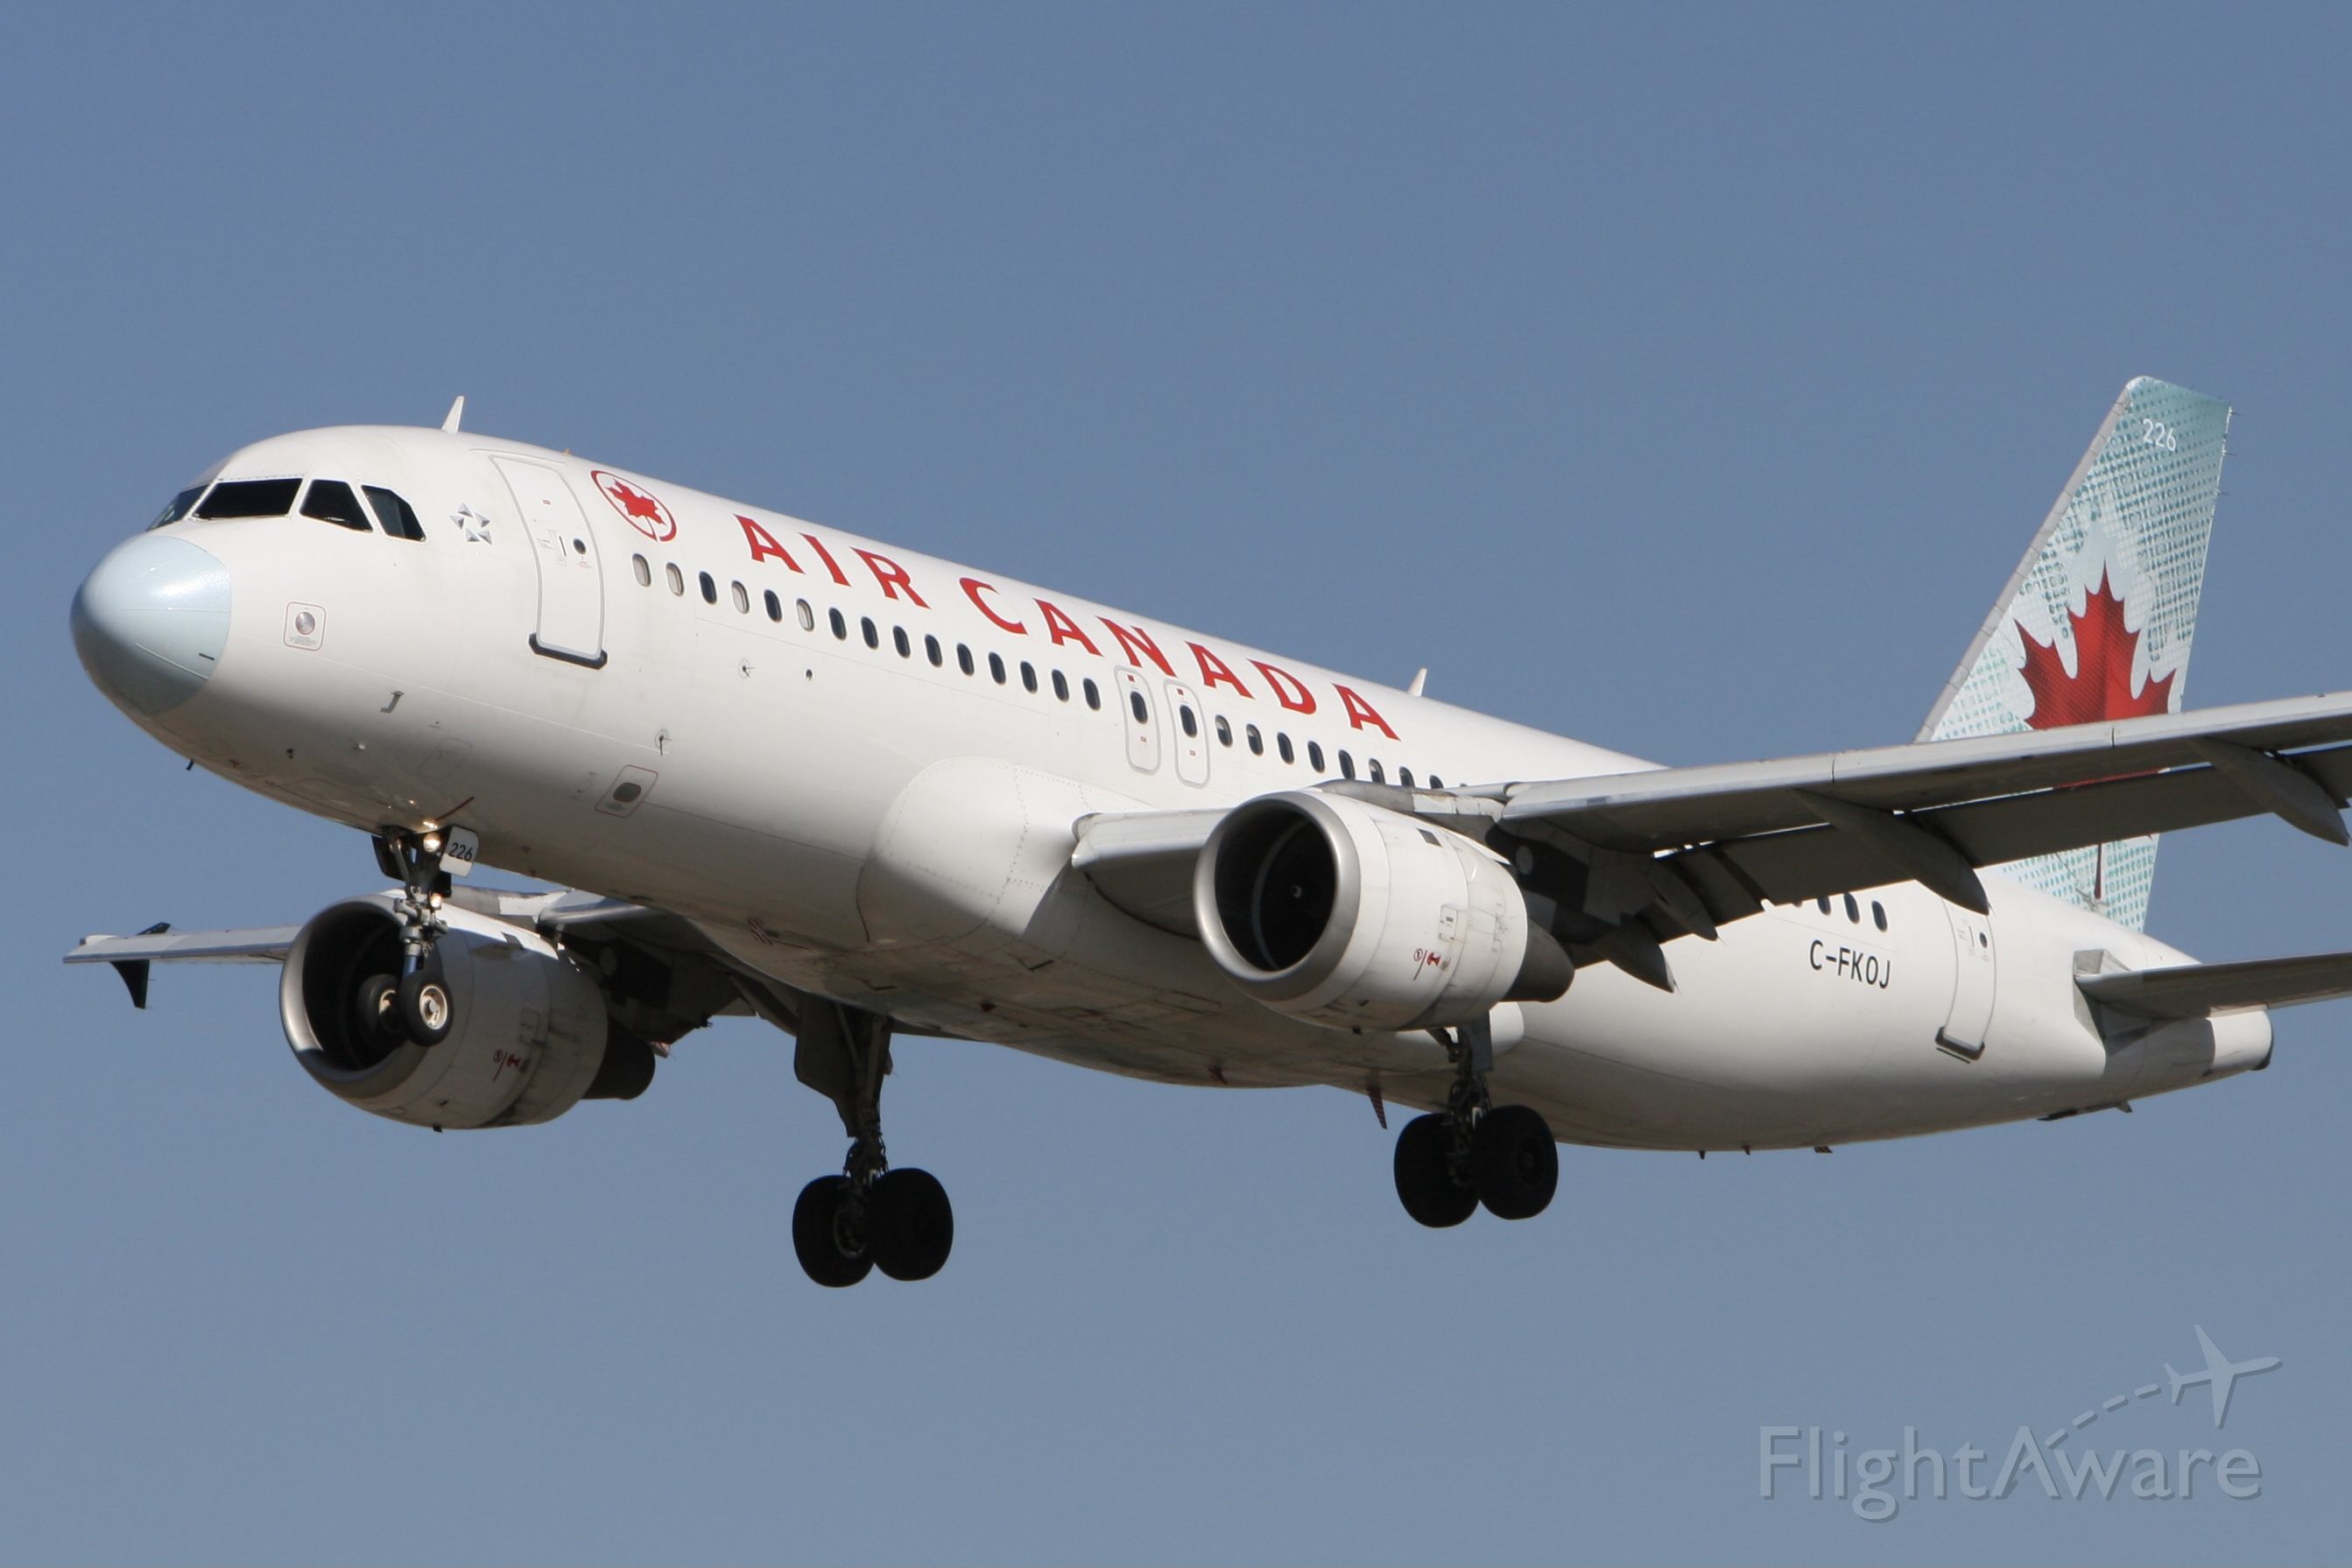 Airbus A320 (C-FKOJ) - March 13, 2009 - approached Toronto 